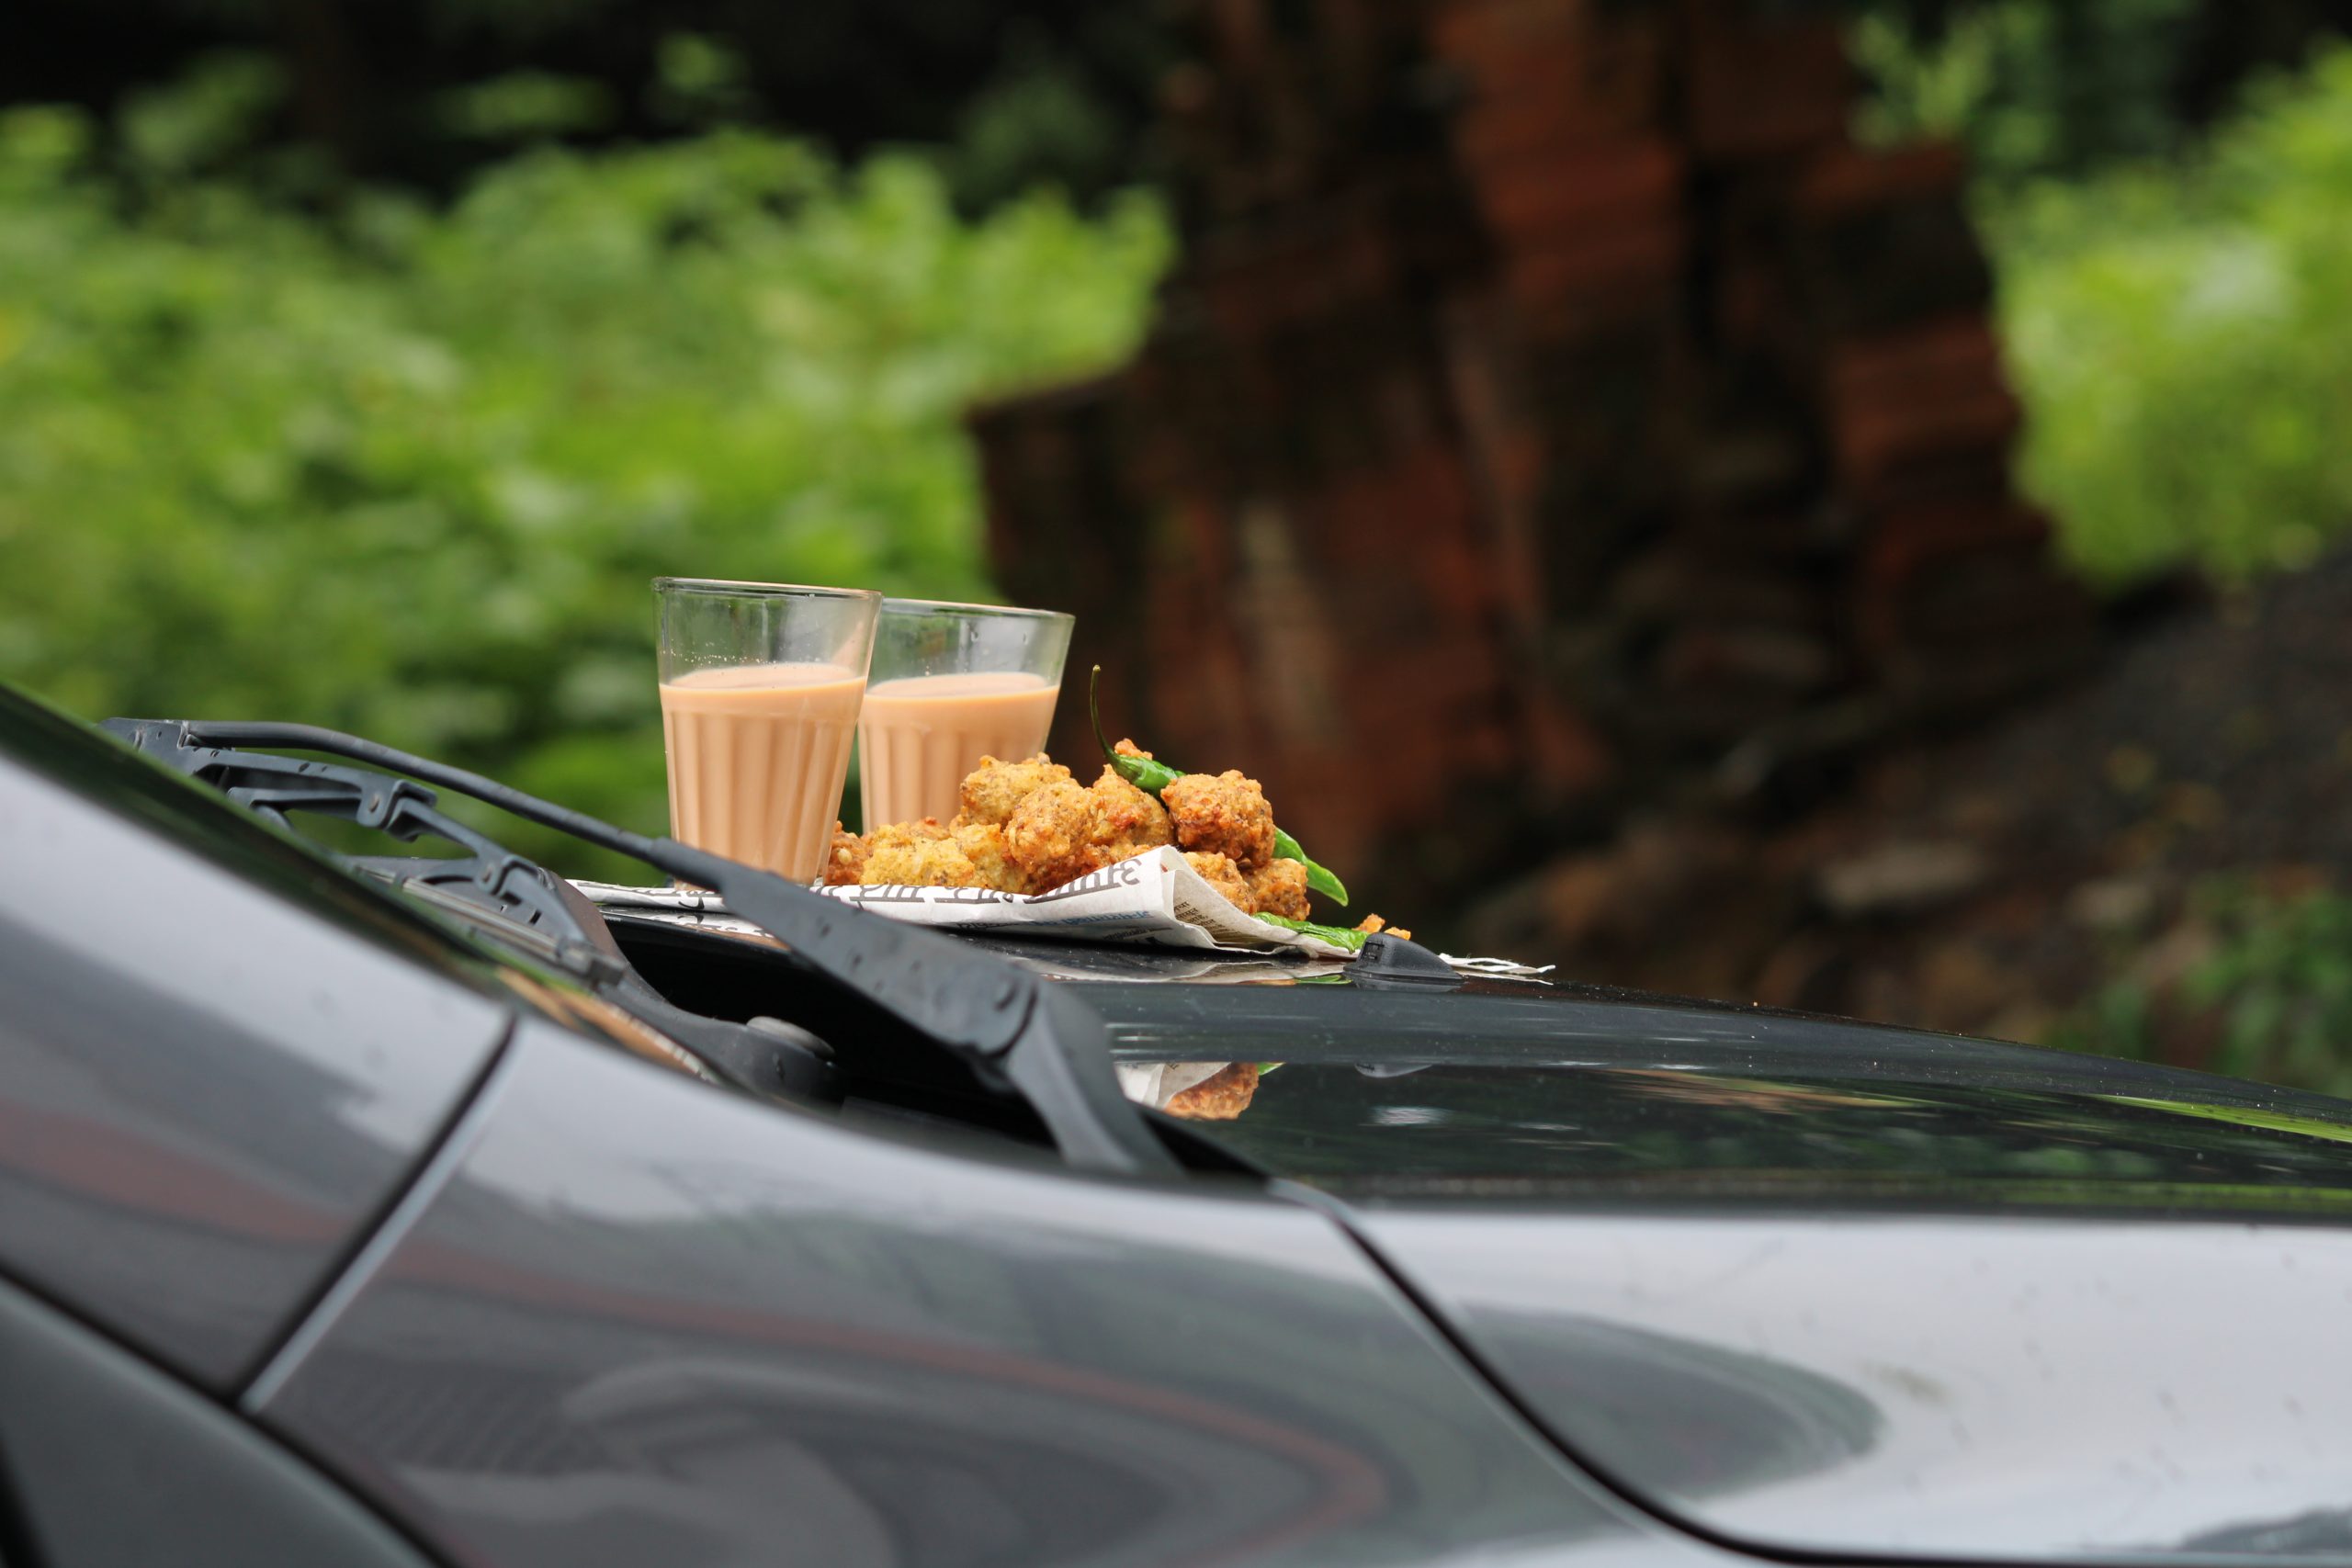 Crispy pakoras, delicious street food, favourite indian snack in monsoon served with Hot Tea. Kept on car's bonnet.